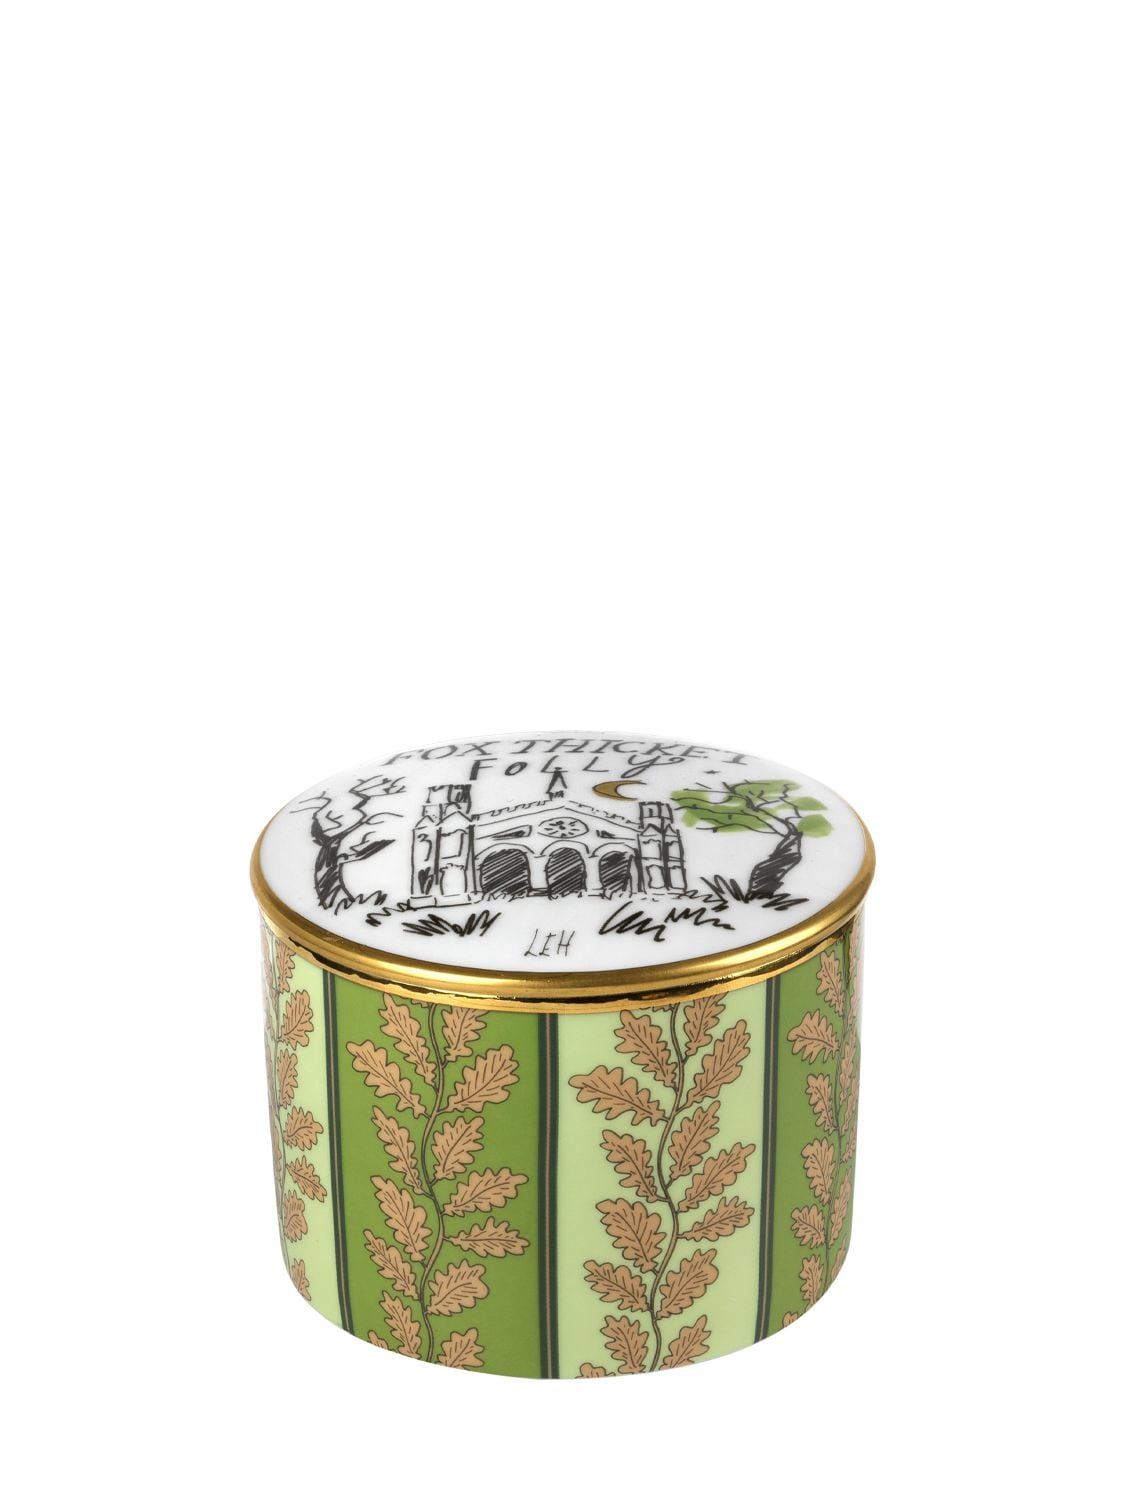 Image of Fox Thicket Folly Porcelain Box